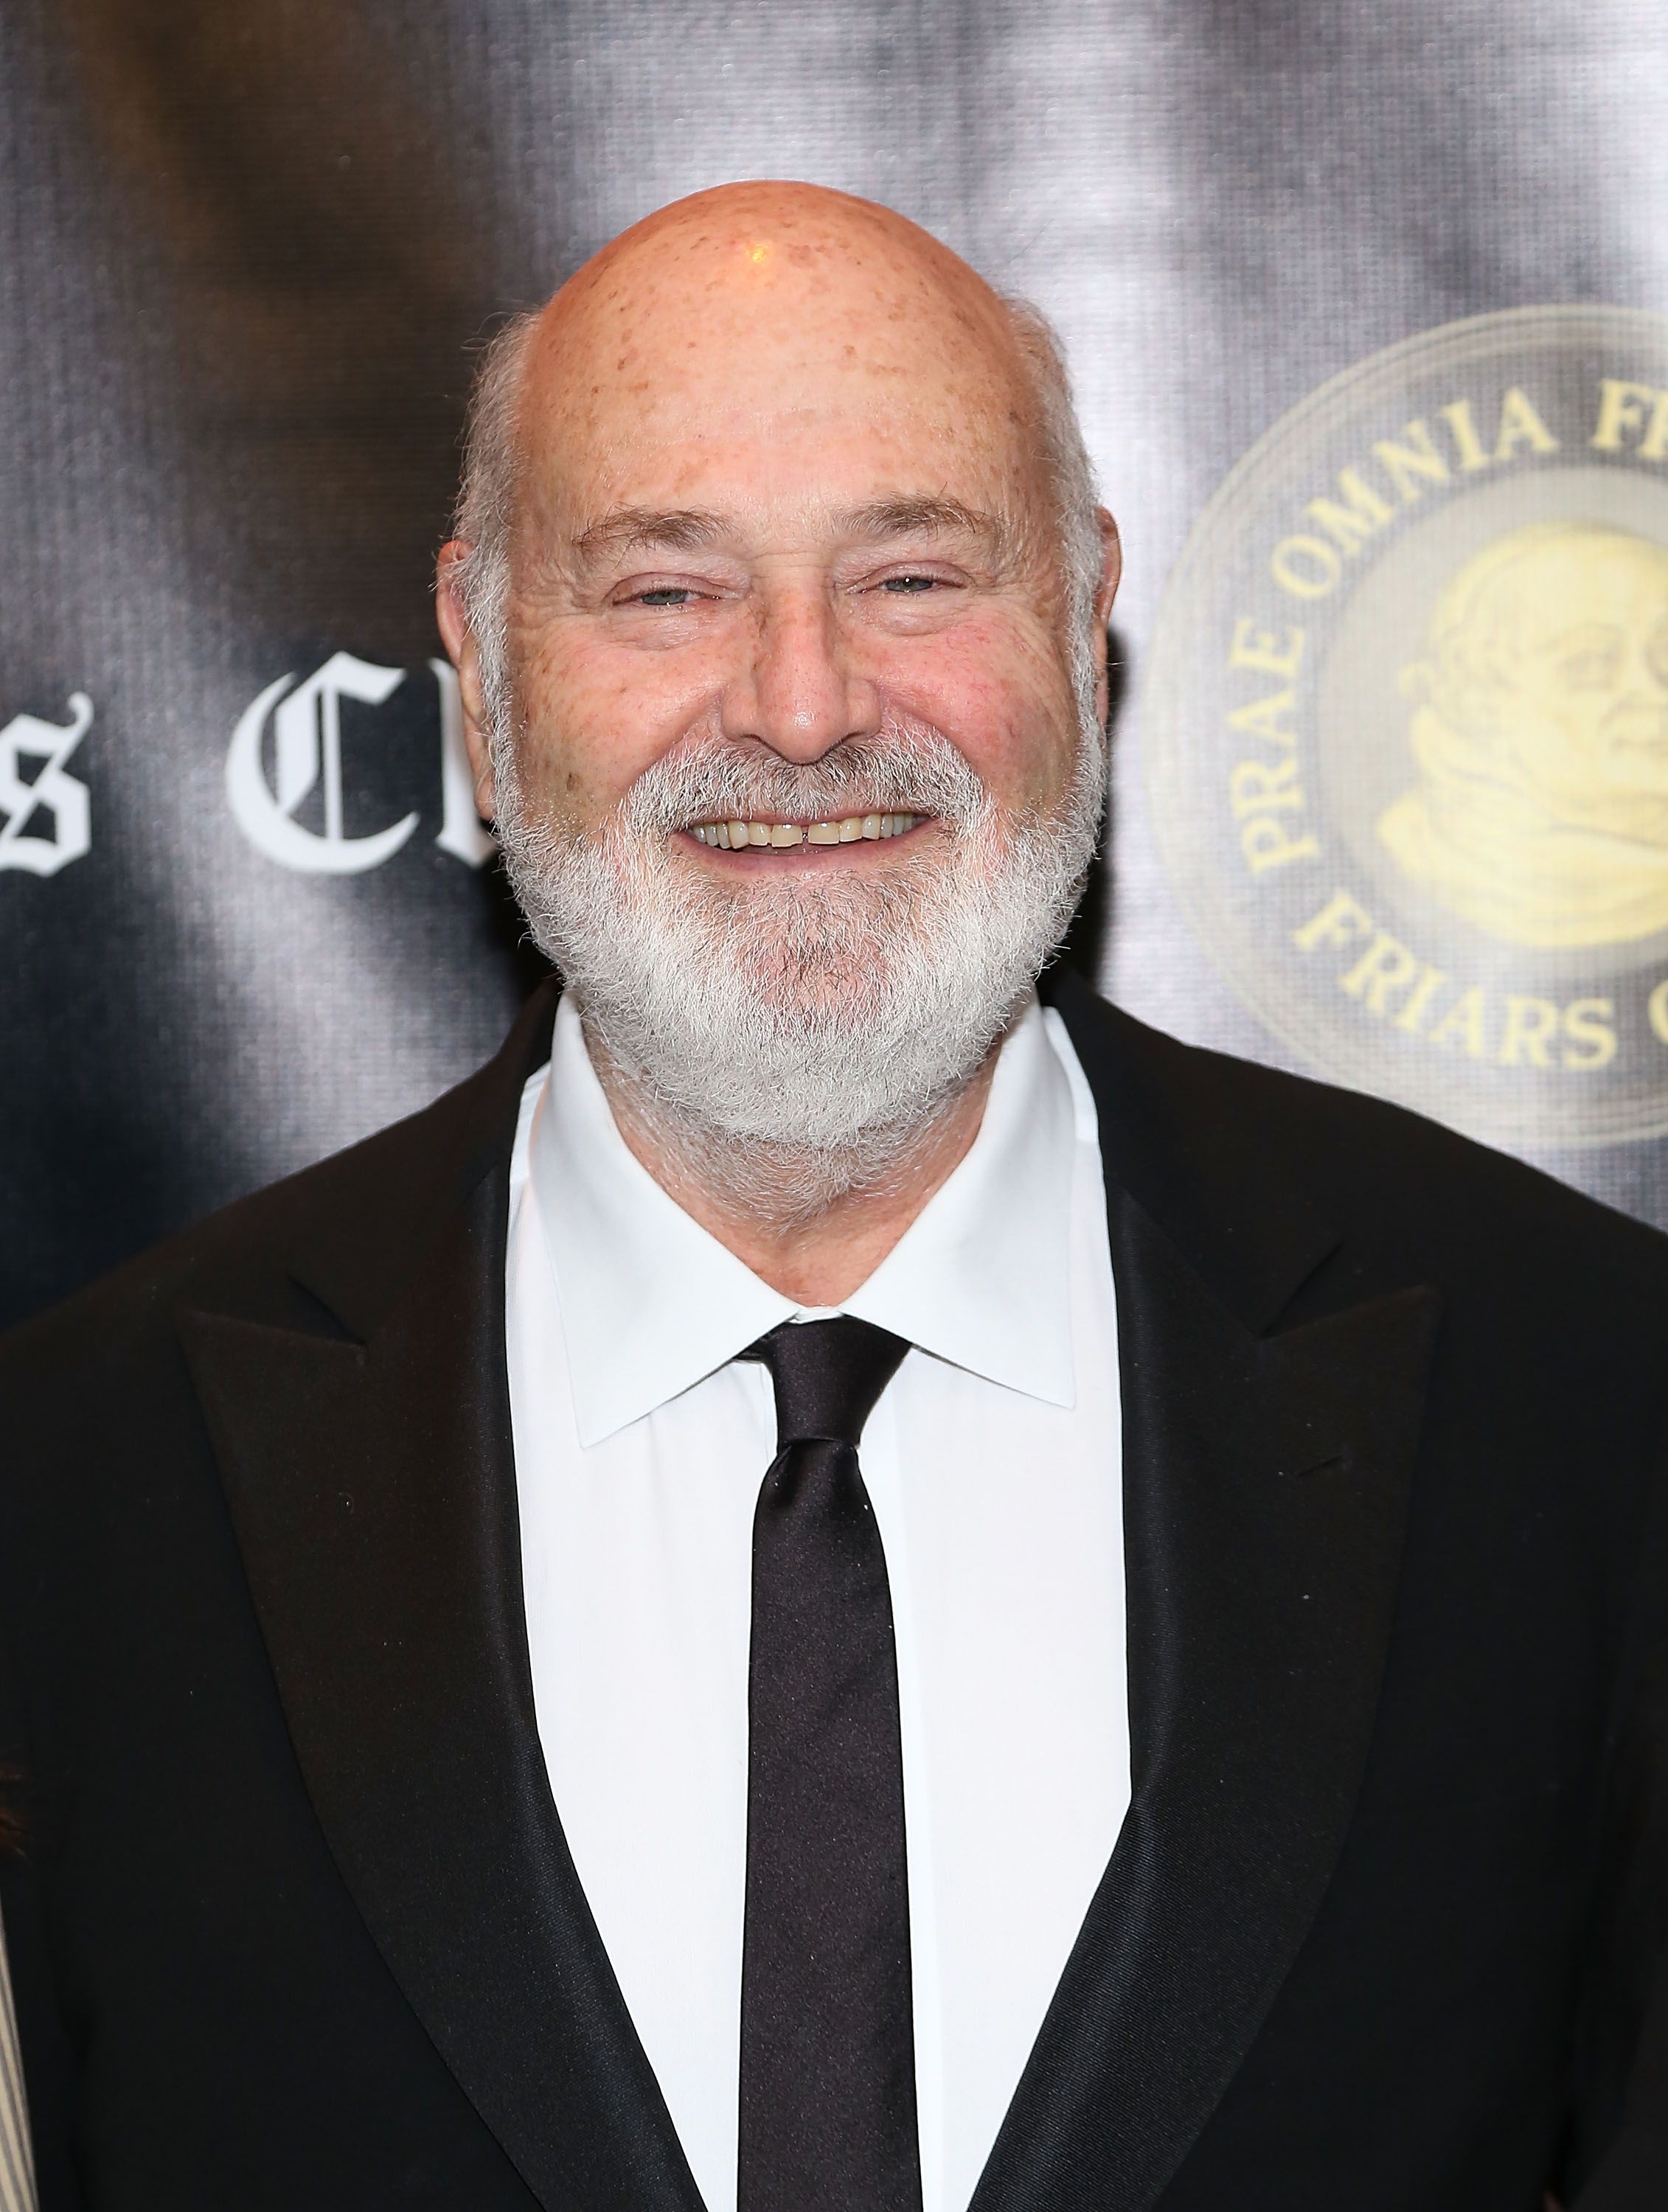 Rob Reiner at the Friar's Club Honors Billy Crystal with their Entertainment Icon Award at The Ziegfeld Ballroom on November 12, 2018 in New York City. | Photo: Getty Images